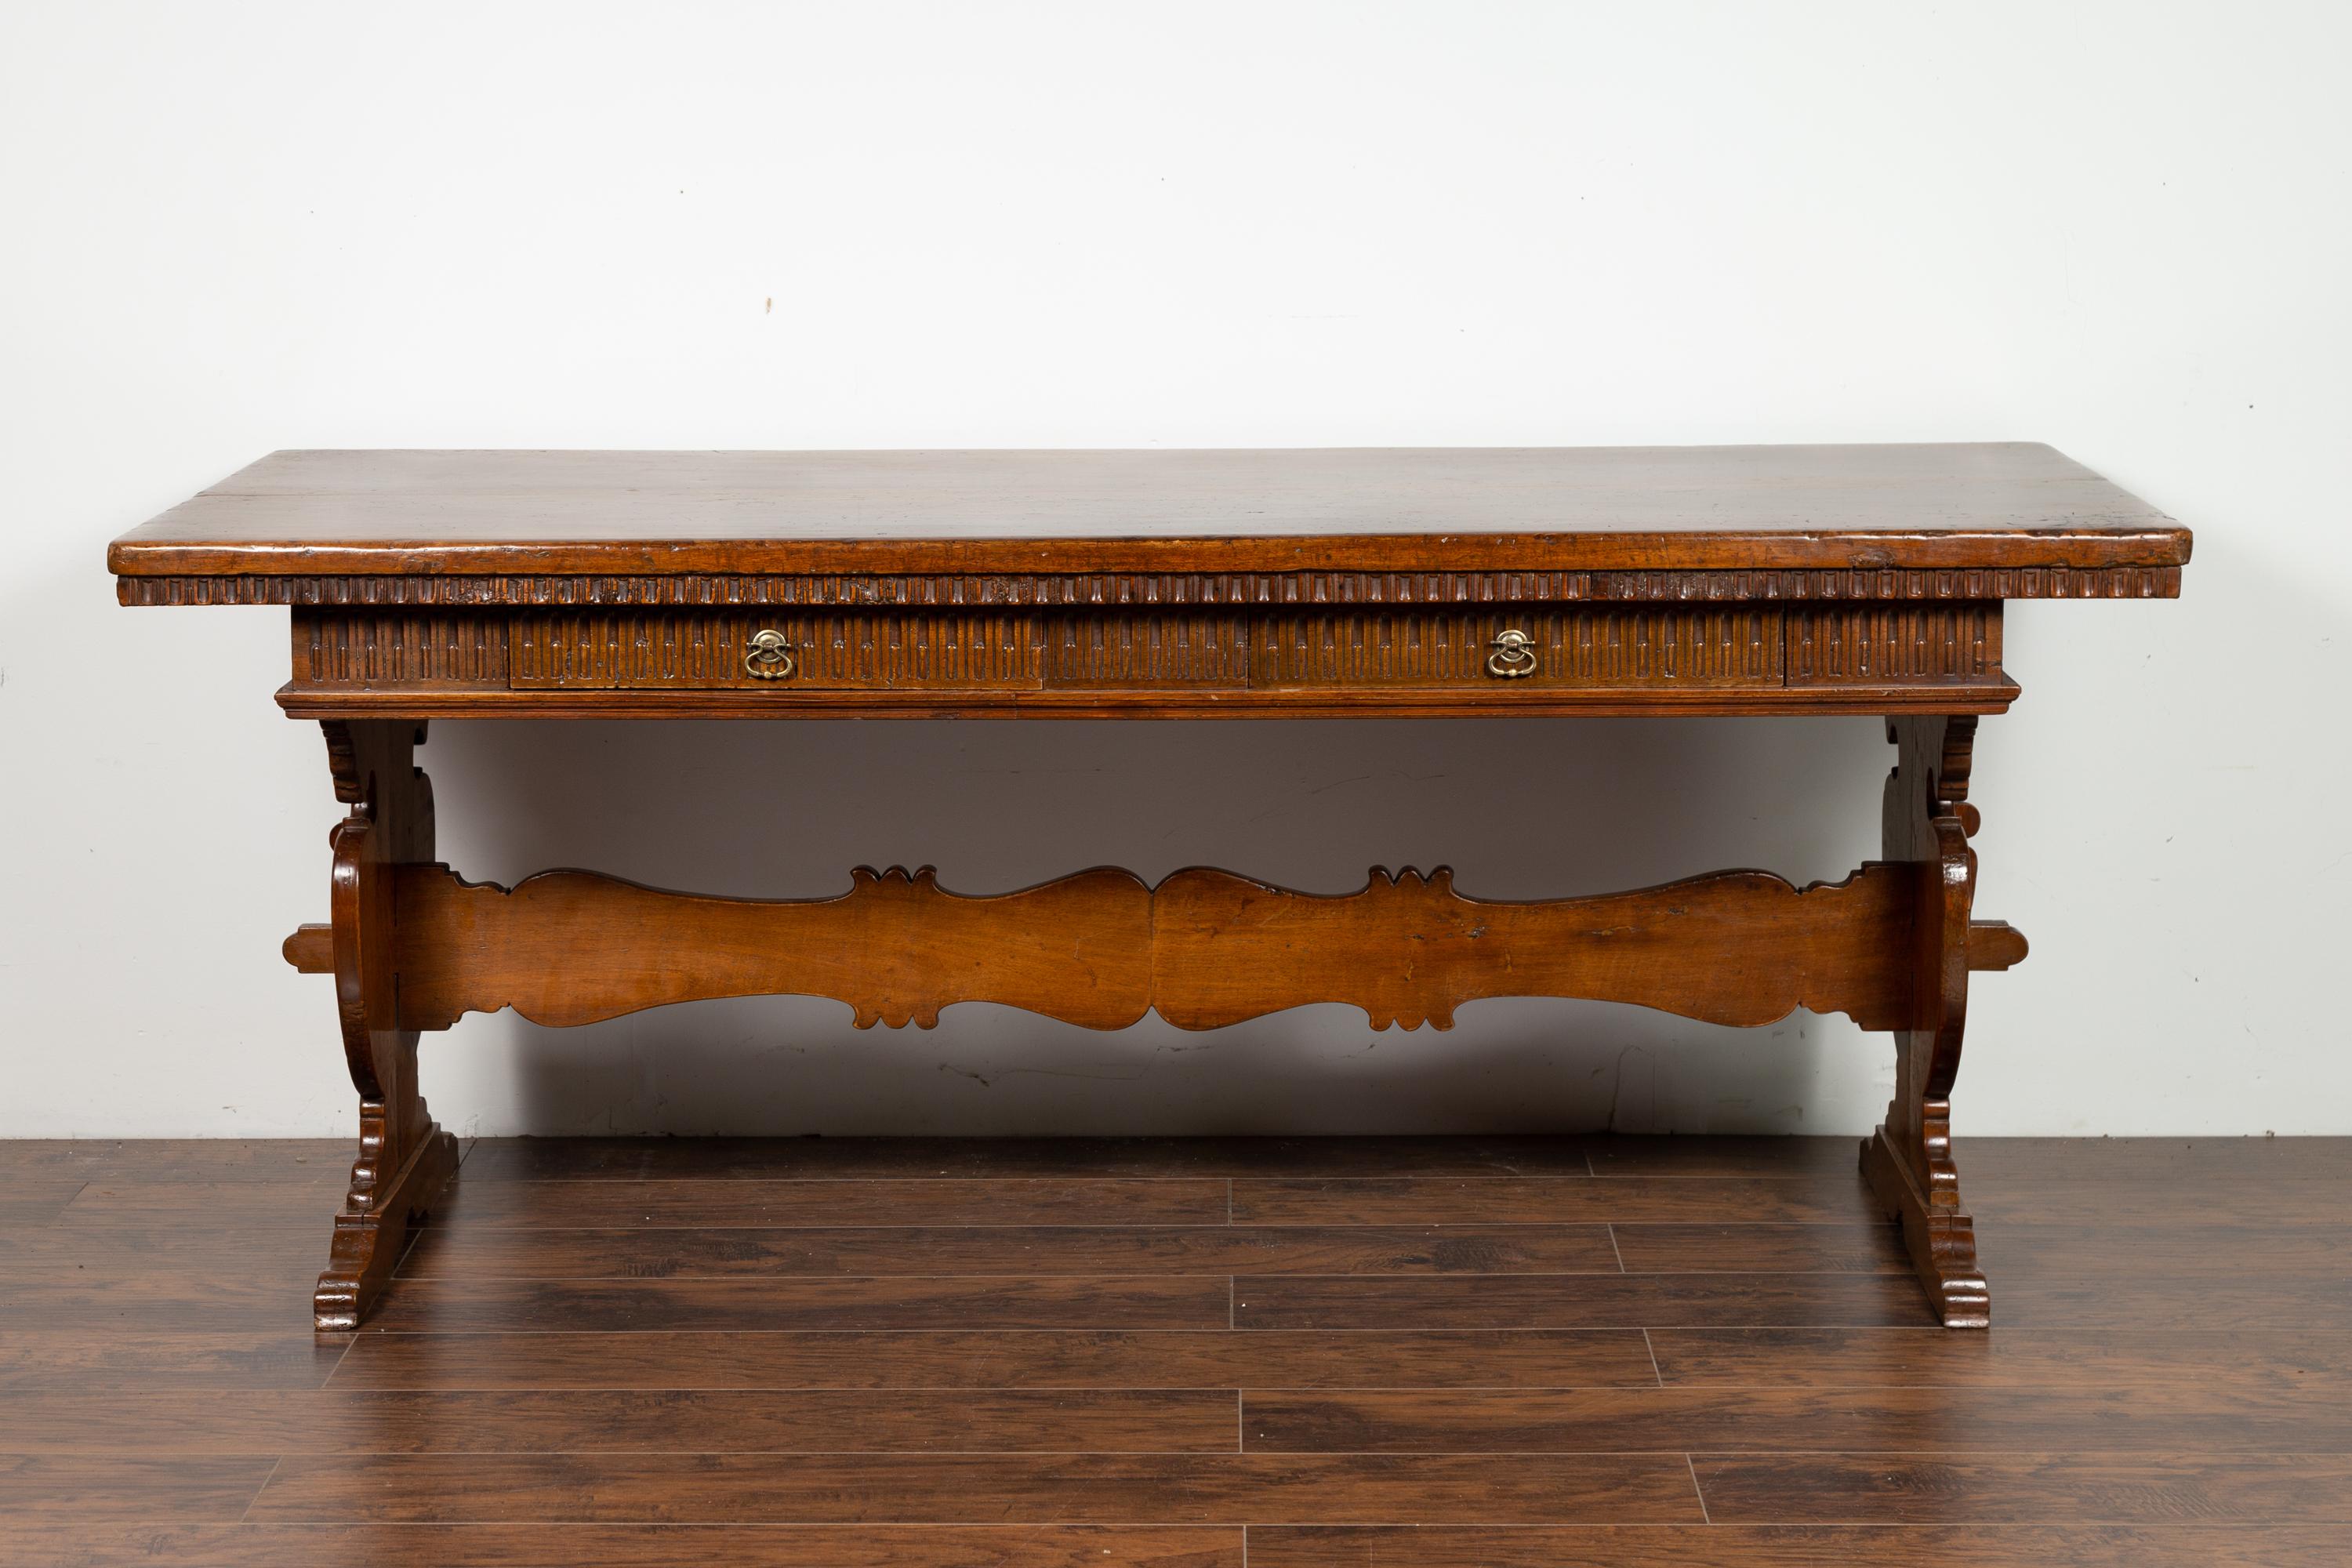 Carved Italian 1840s Walnut Trestle Table with Two Drawers and Fluted Accents